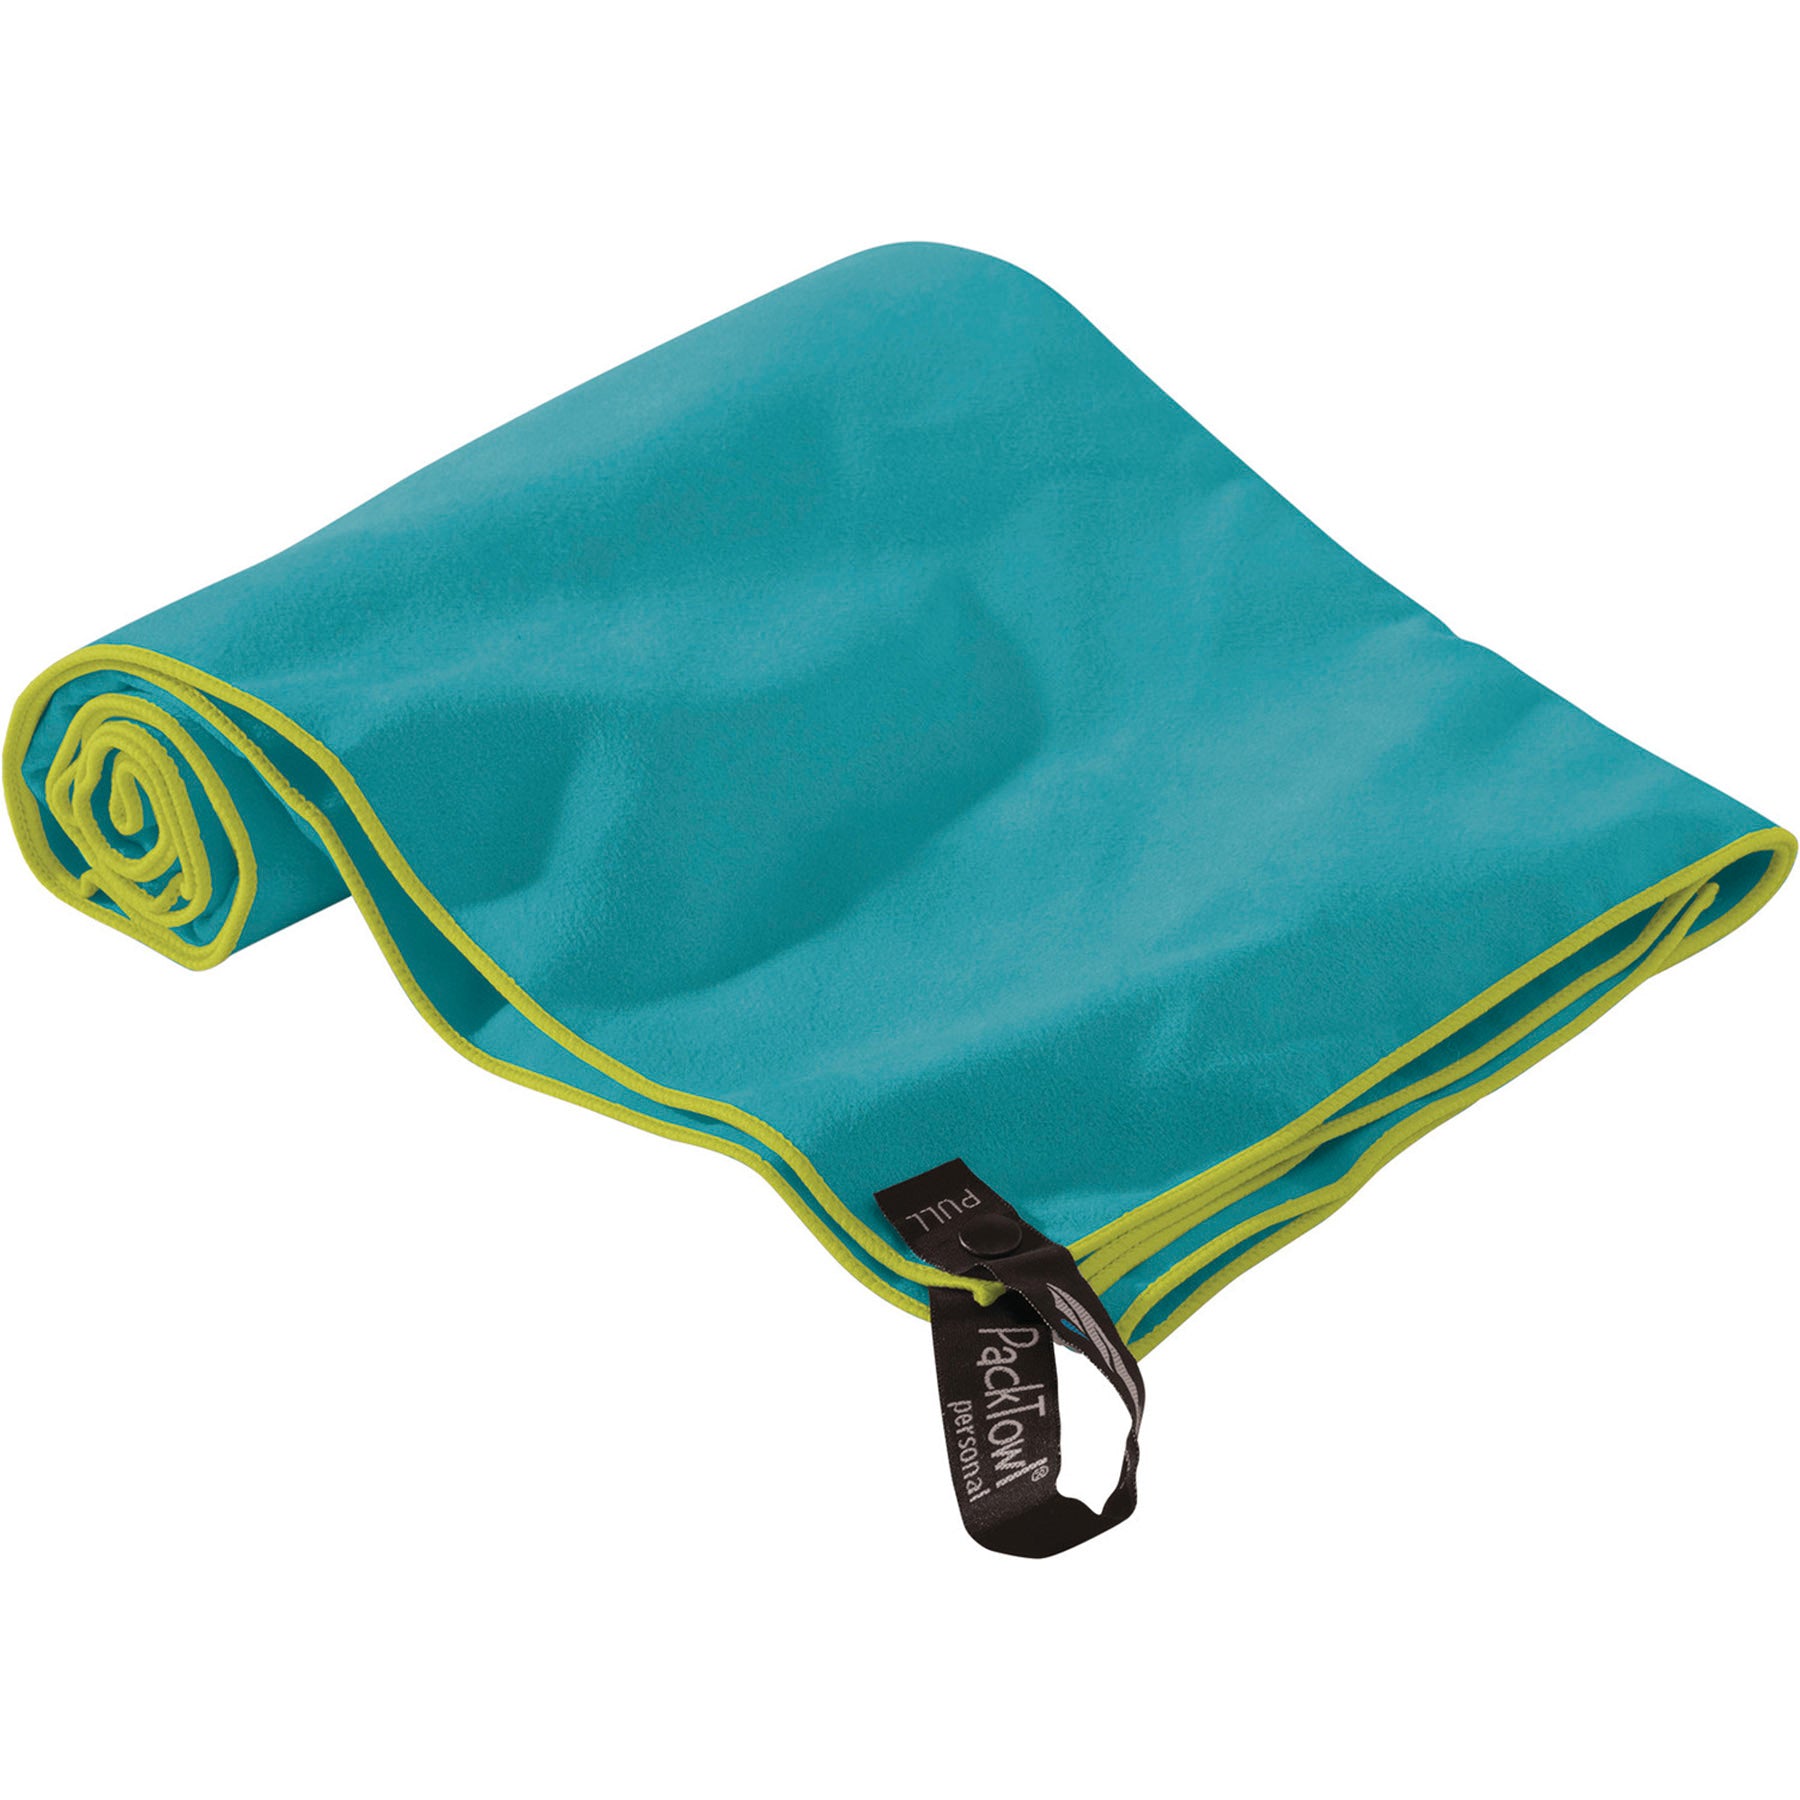 PackTowl Personal Alpine Reflection Hand Towel